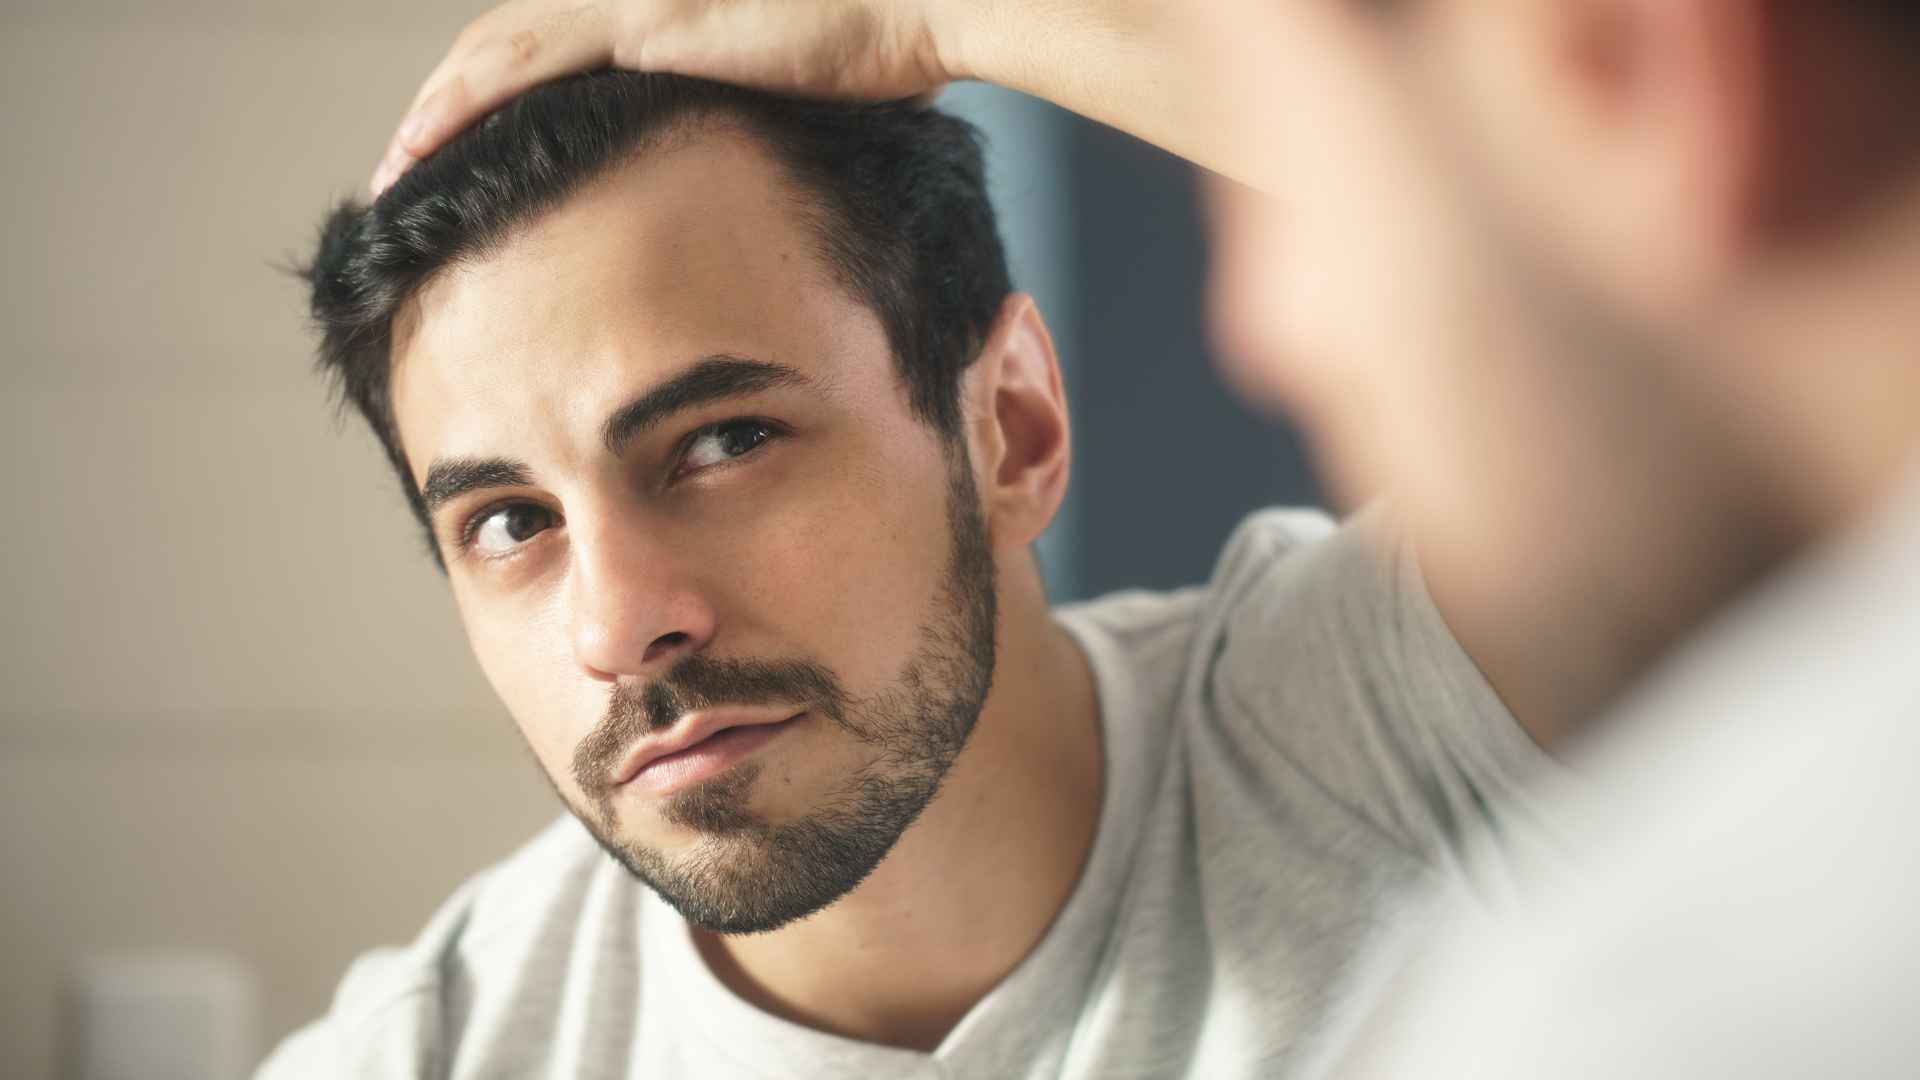 Is Hair Loss Genetic? The Role of Genetics in Hair Loss